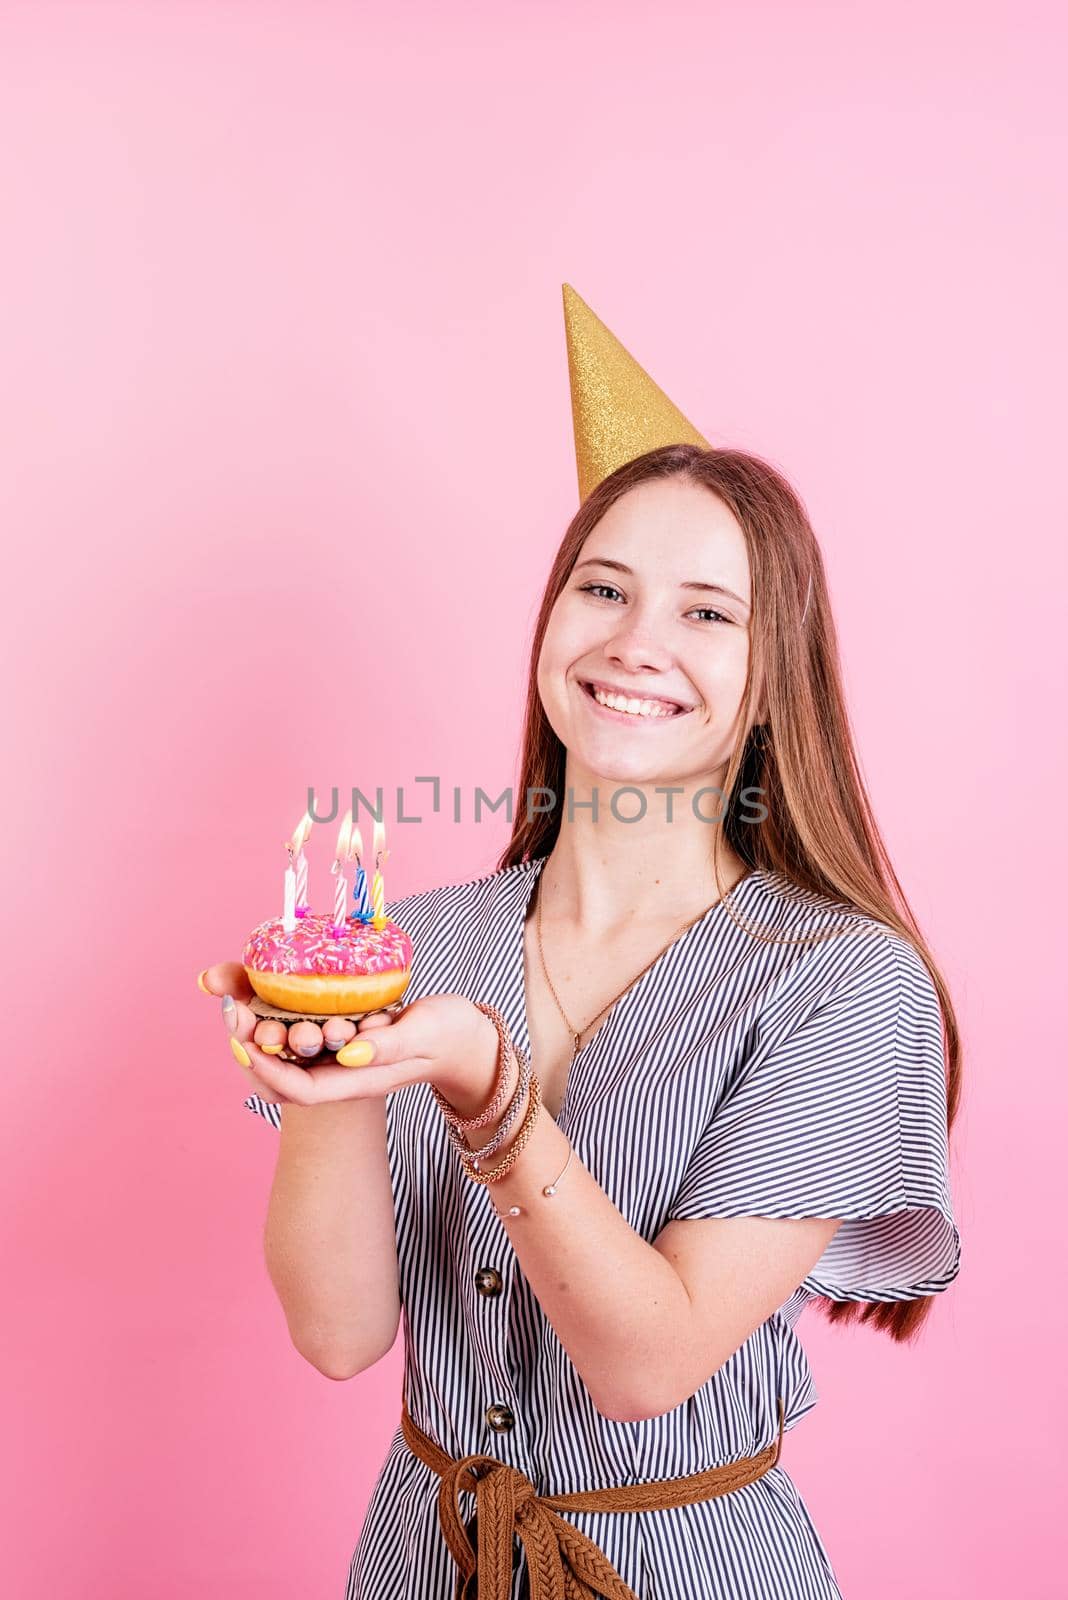 Birthday party. Teenager girl in golden birthday holding donut with candle, making a wish over pink background